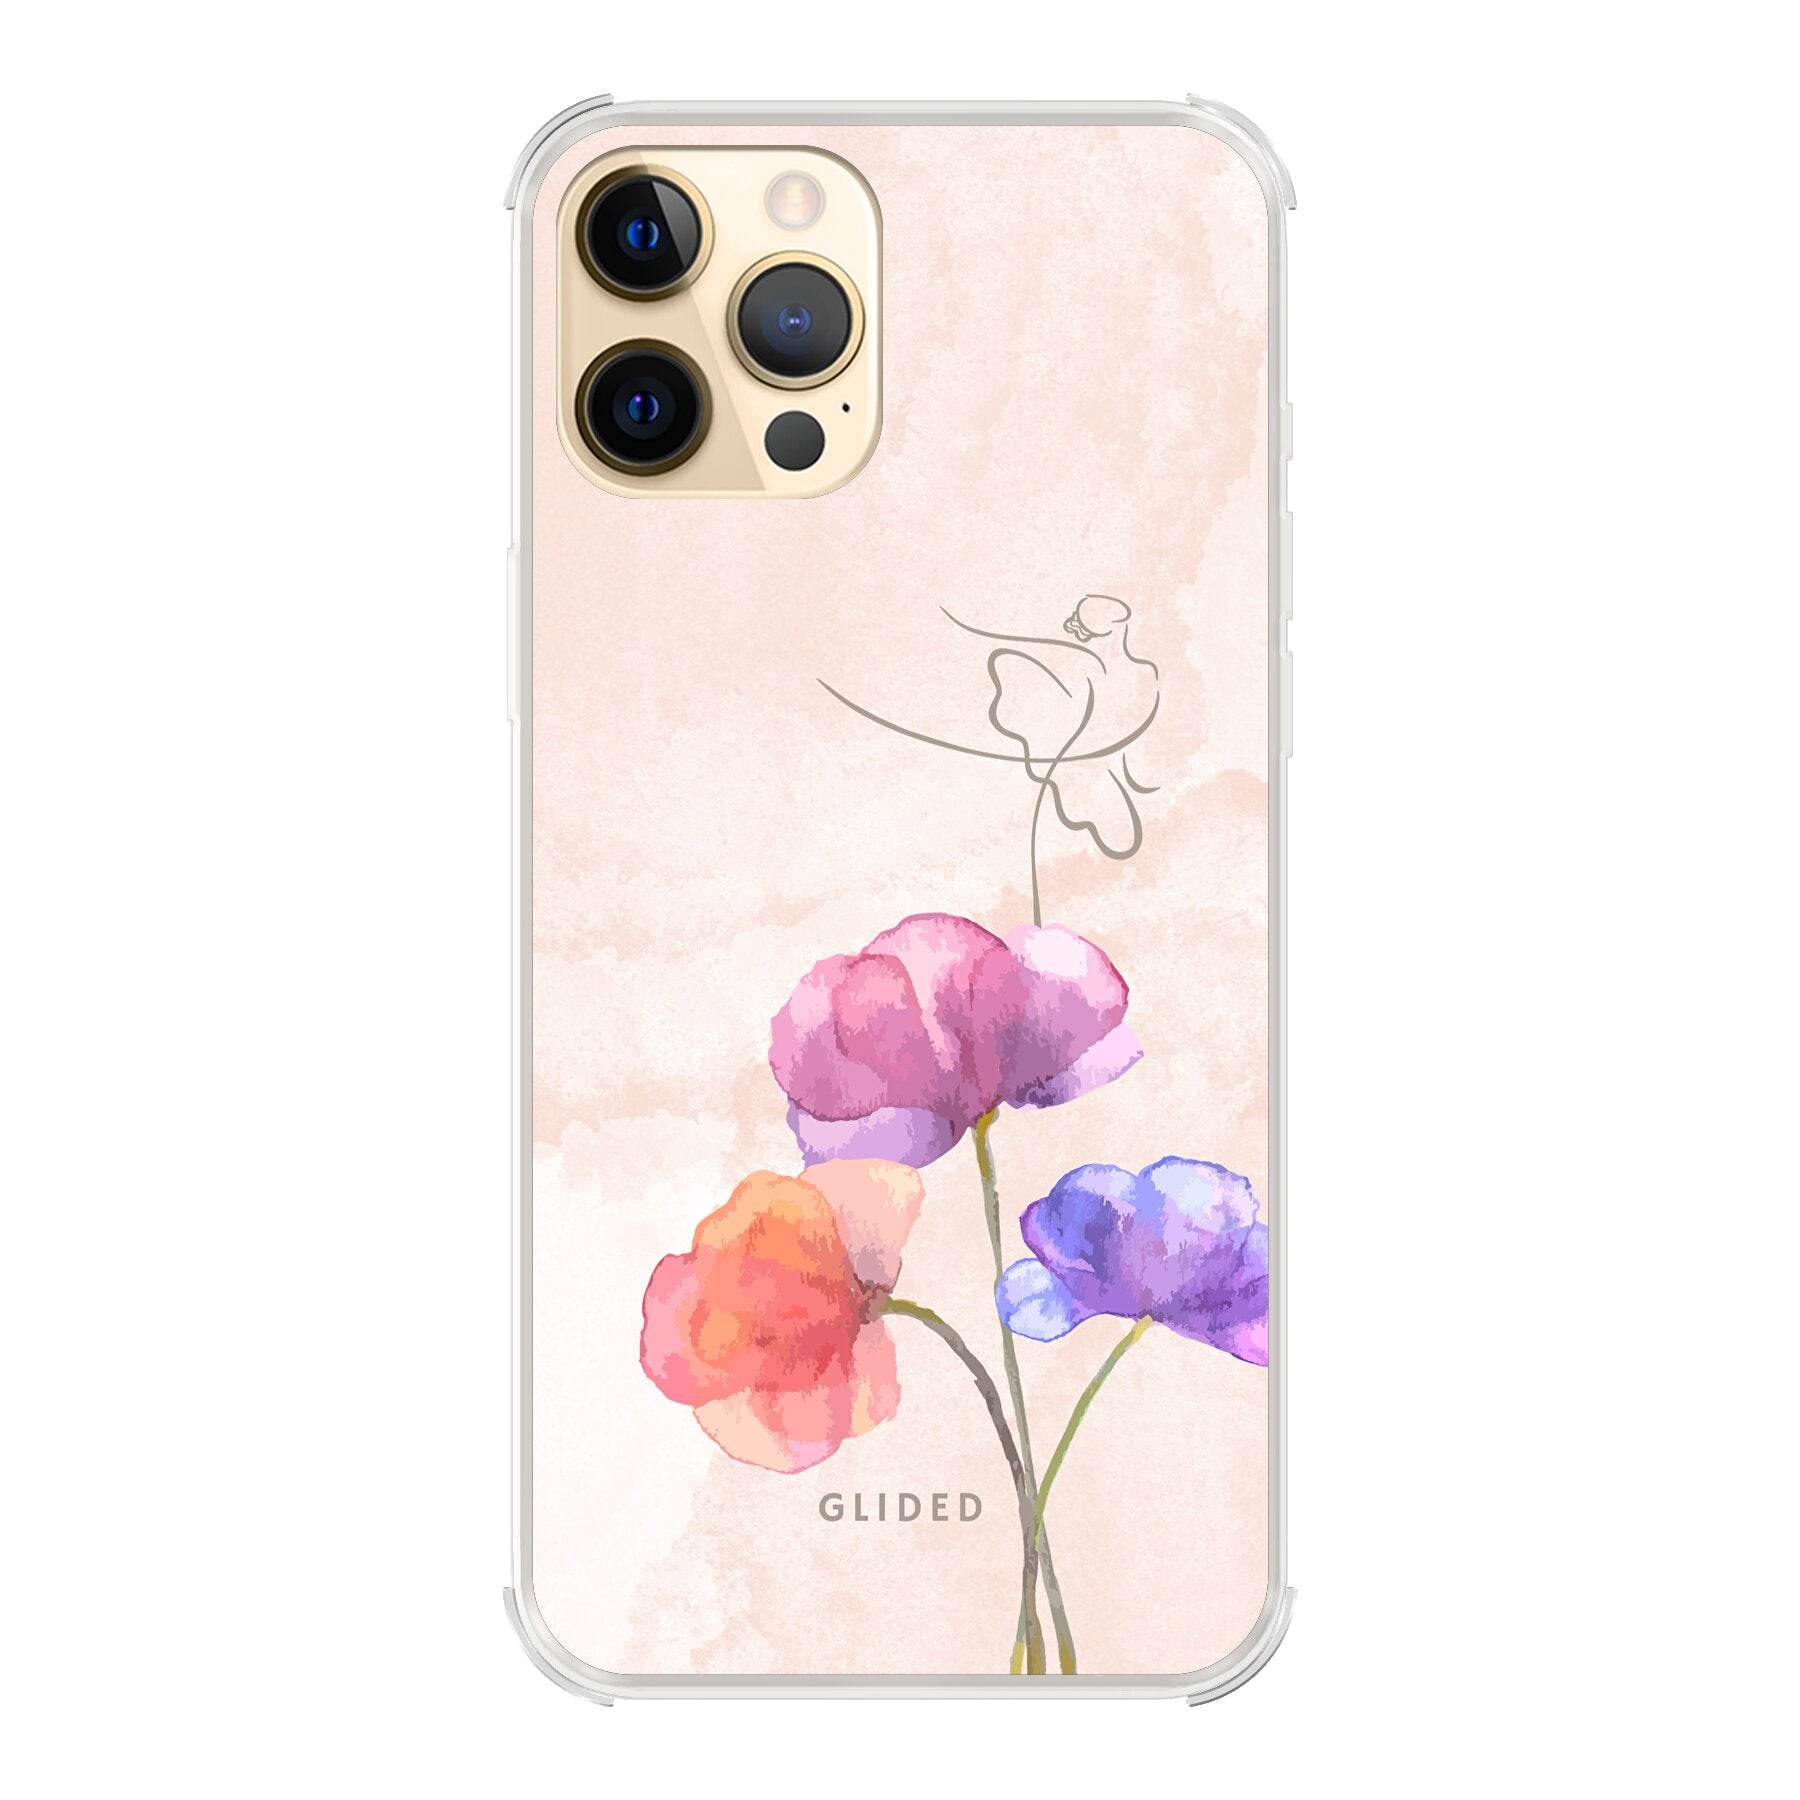 Blossom - iPhone 12 Pro Max Handyhülle Bumper case